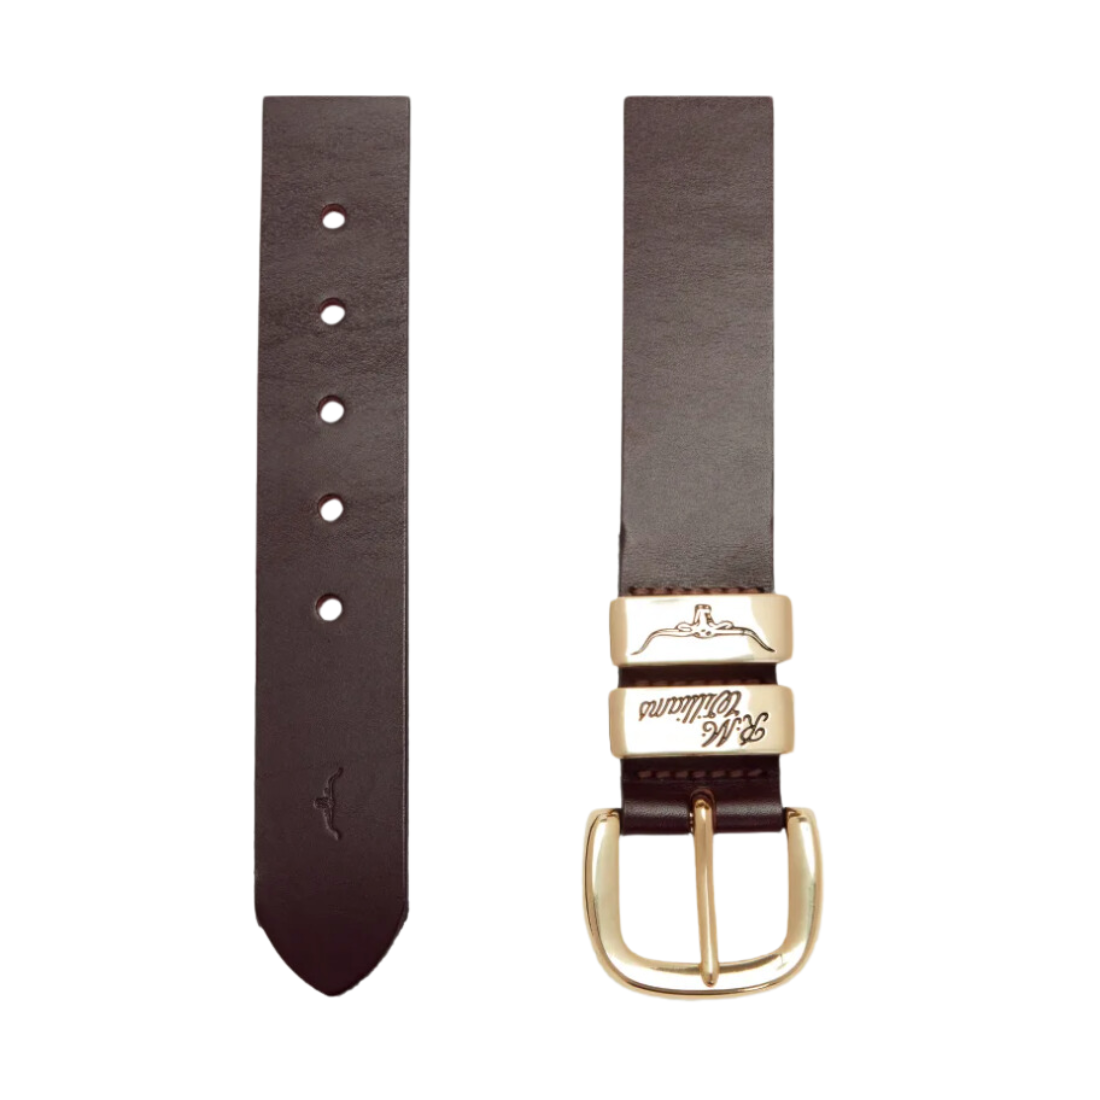 RM Williams Gold 1 1/2 inch Solid Hide Belt